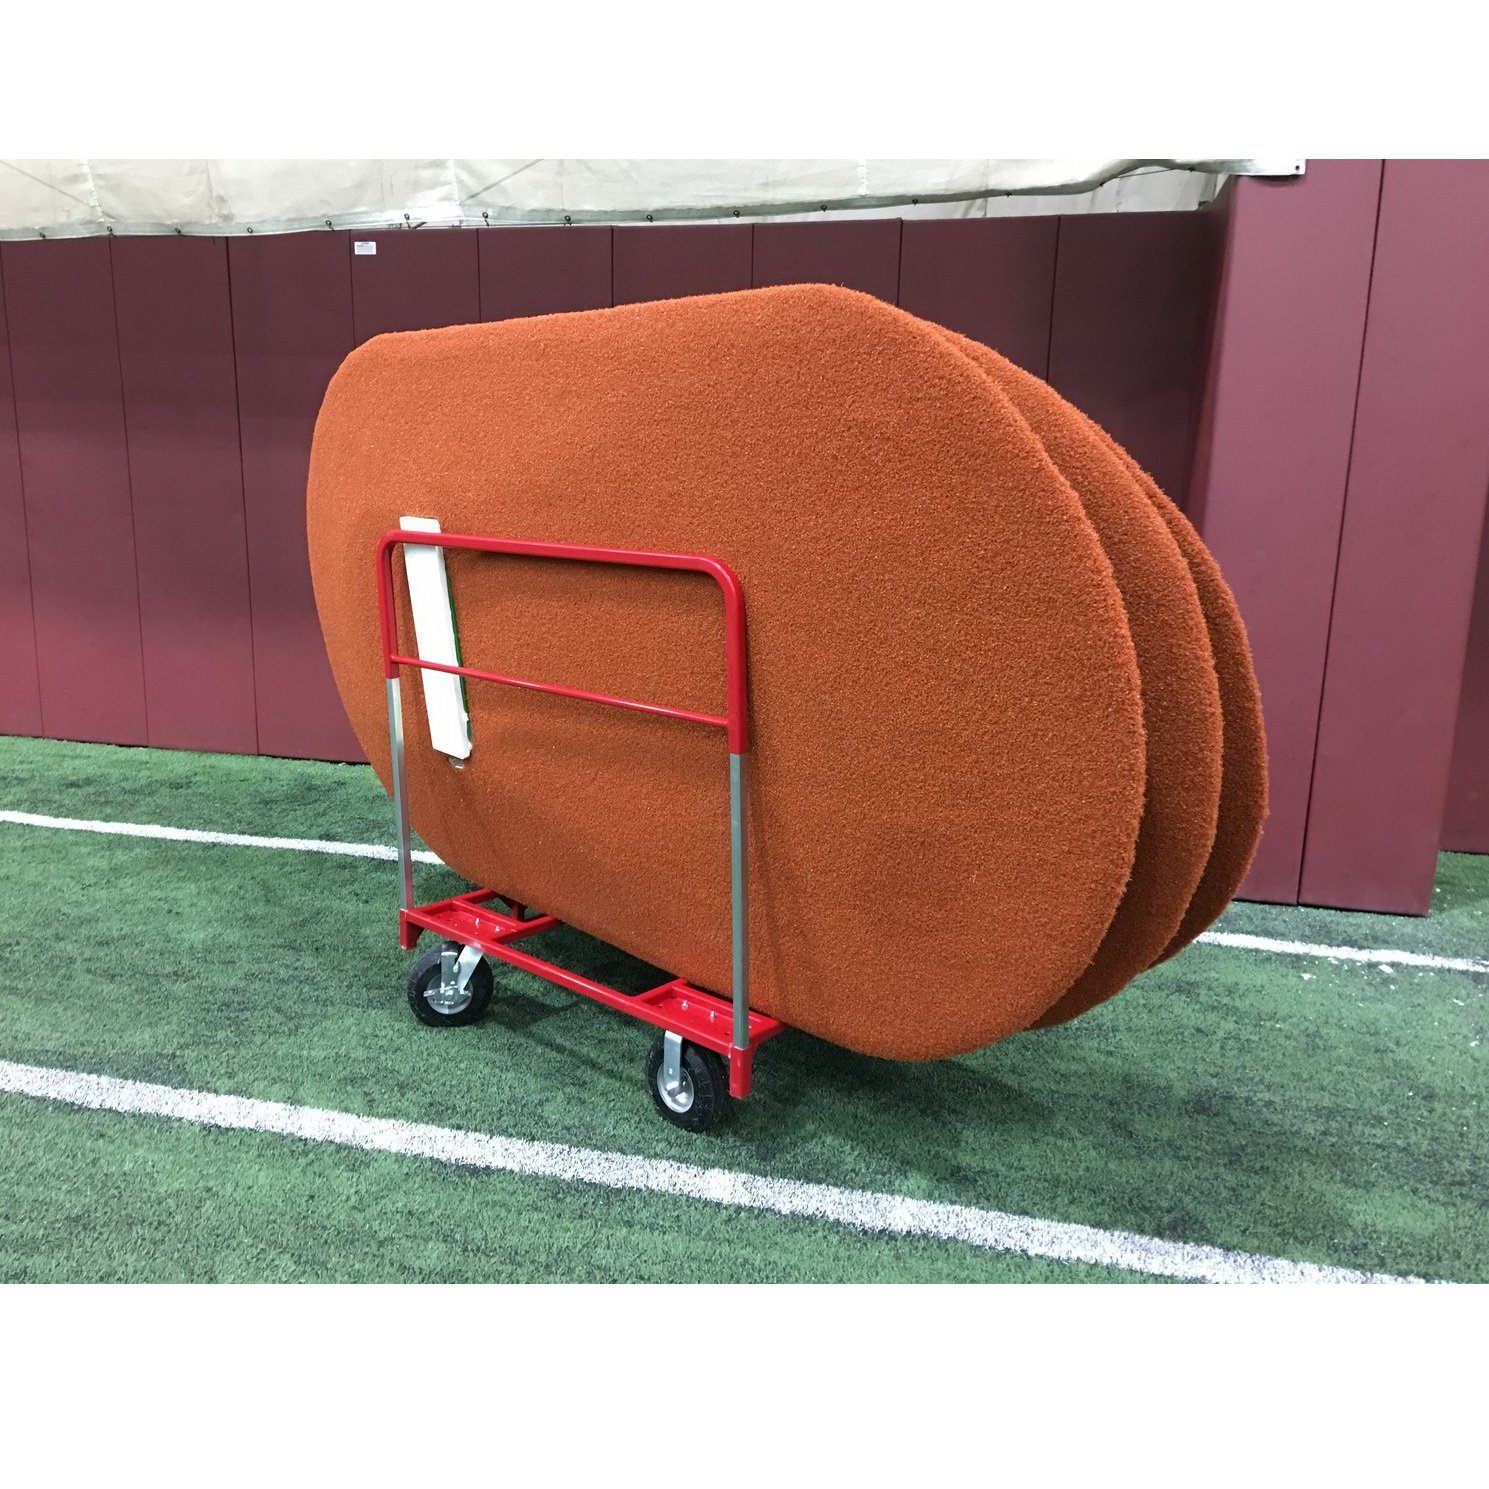 PortoLite 6" Little League Full Length Portable Game Pitching Mound